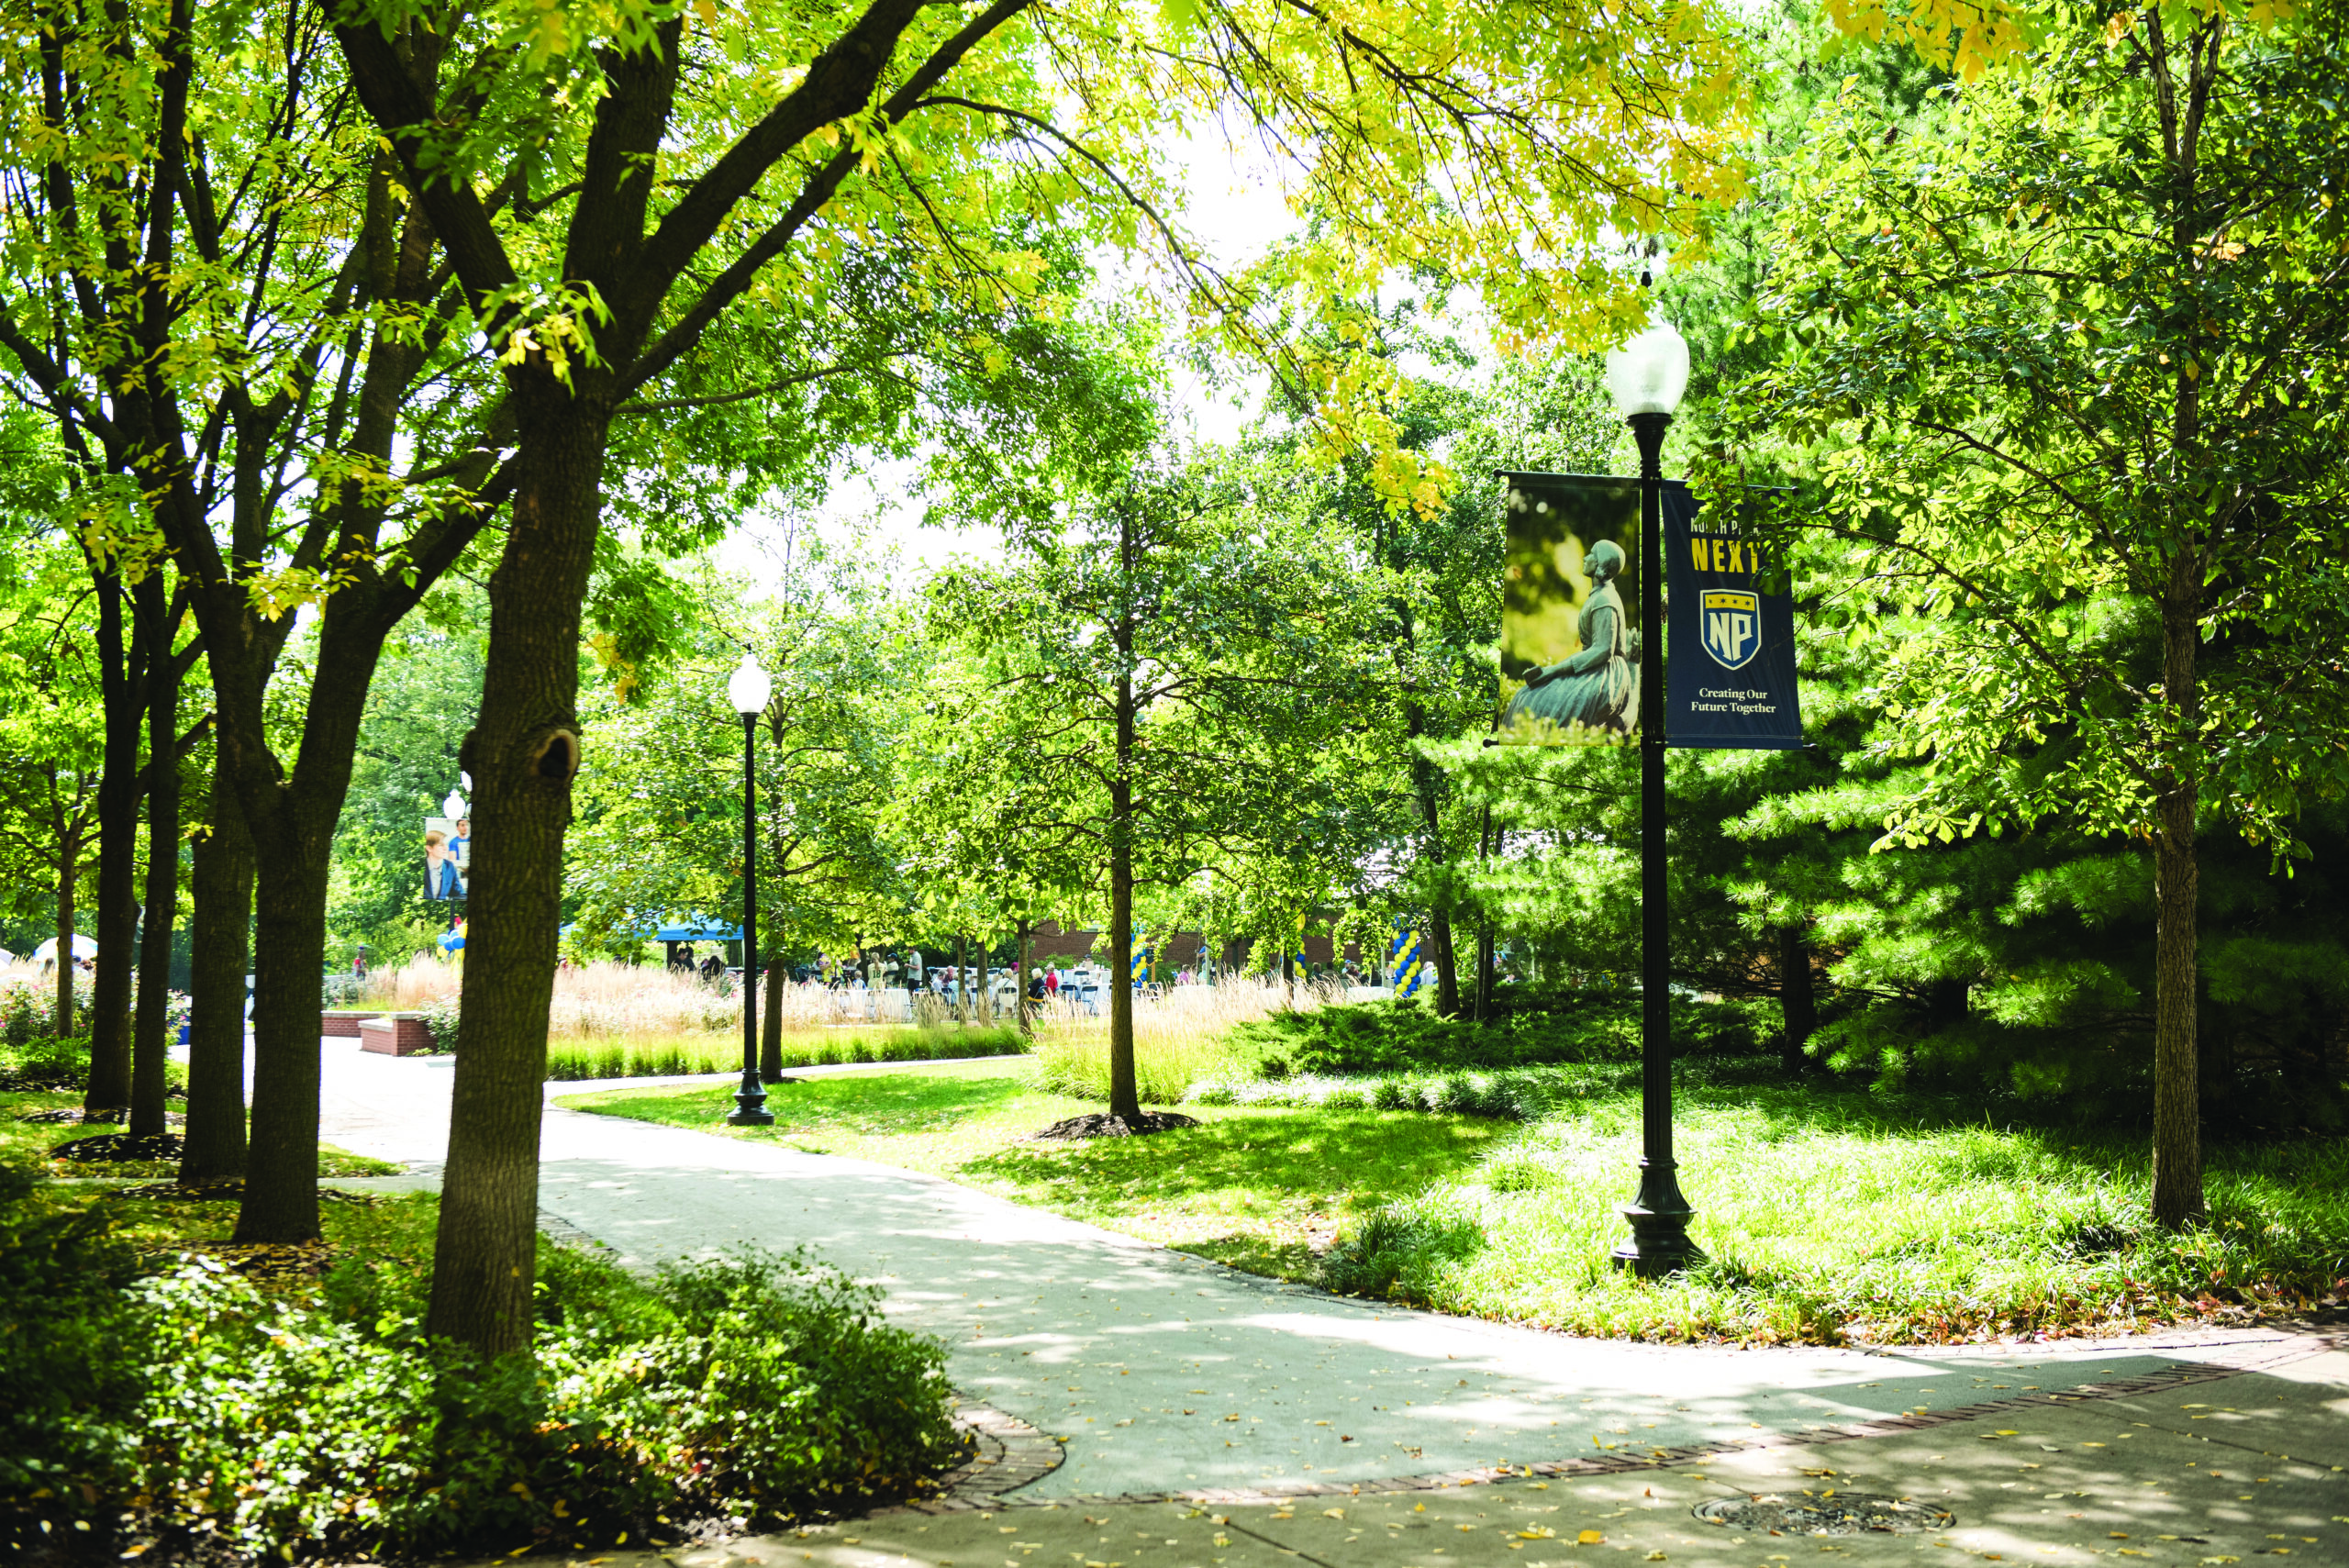 North Park campus trees and path during the summer